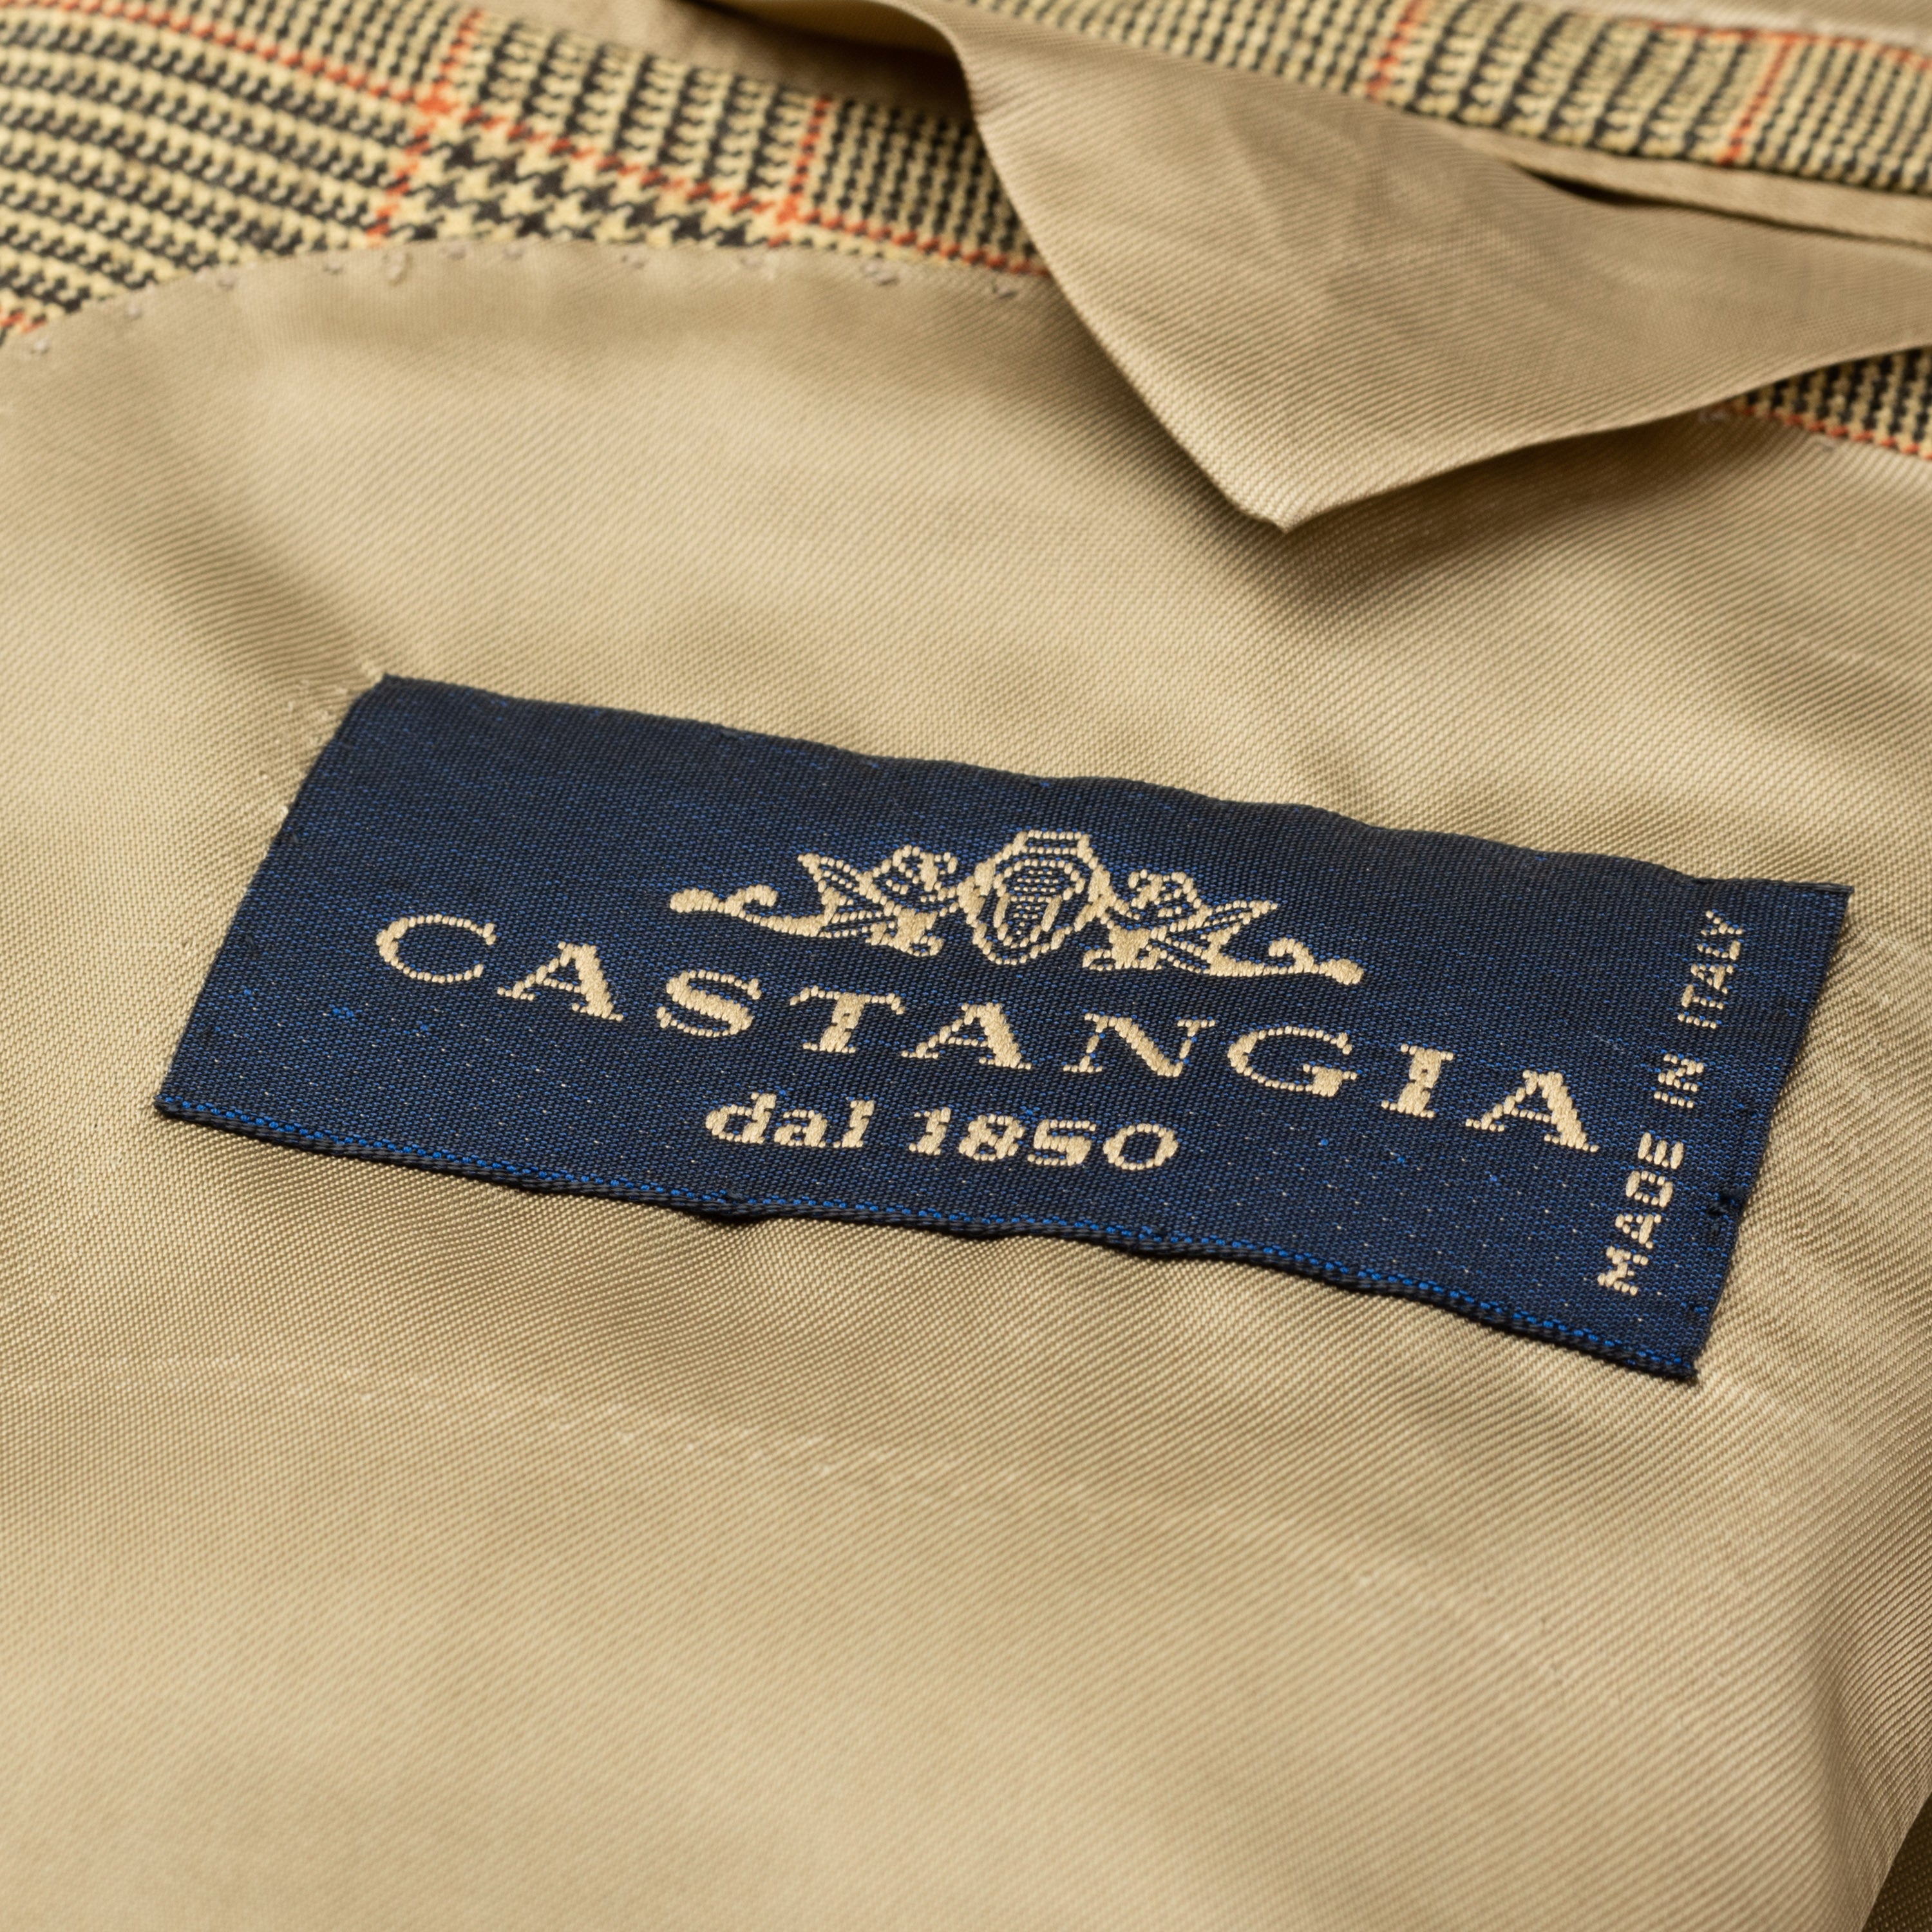 CASTANGIA 1850 Light Olive Prince of Wales Wool Sport Coat Jacket 48 NEW US 38 CASTANGIA